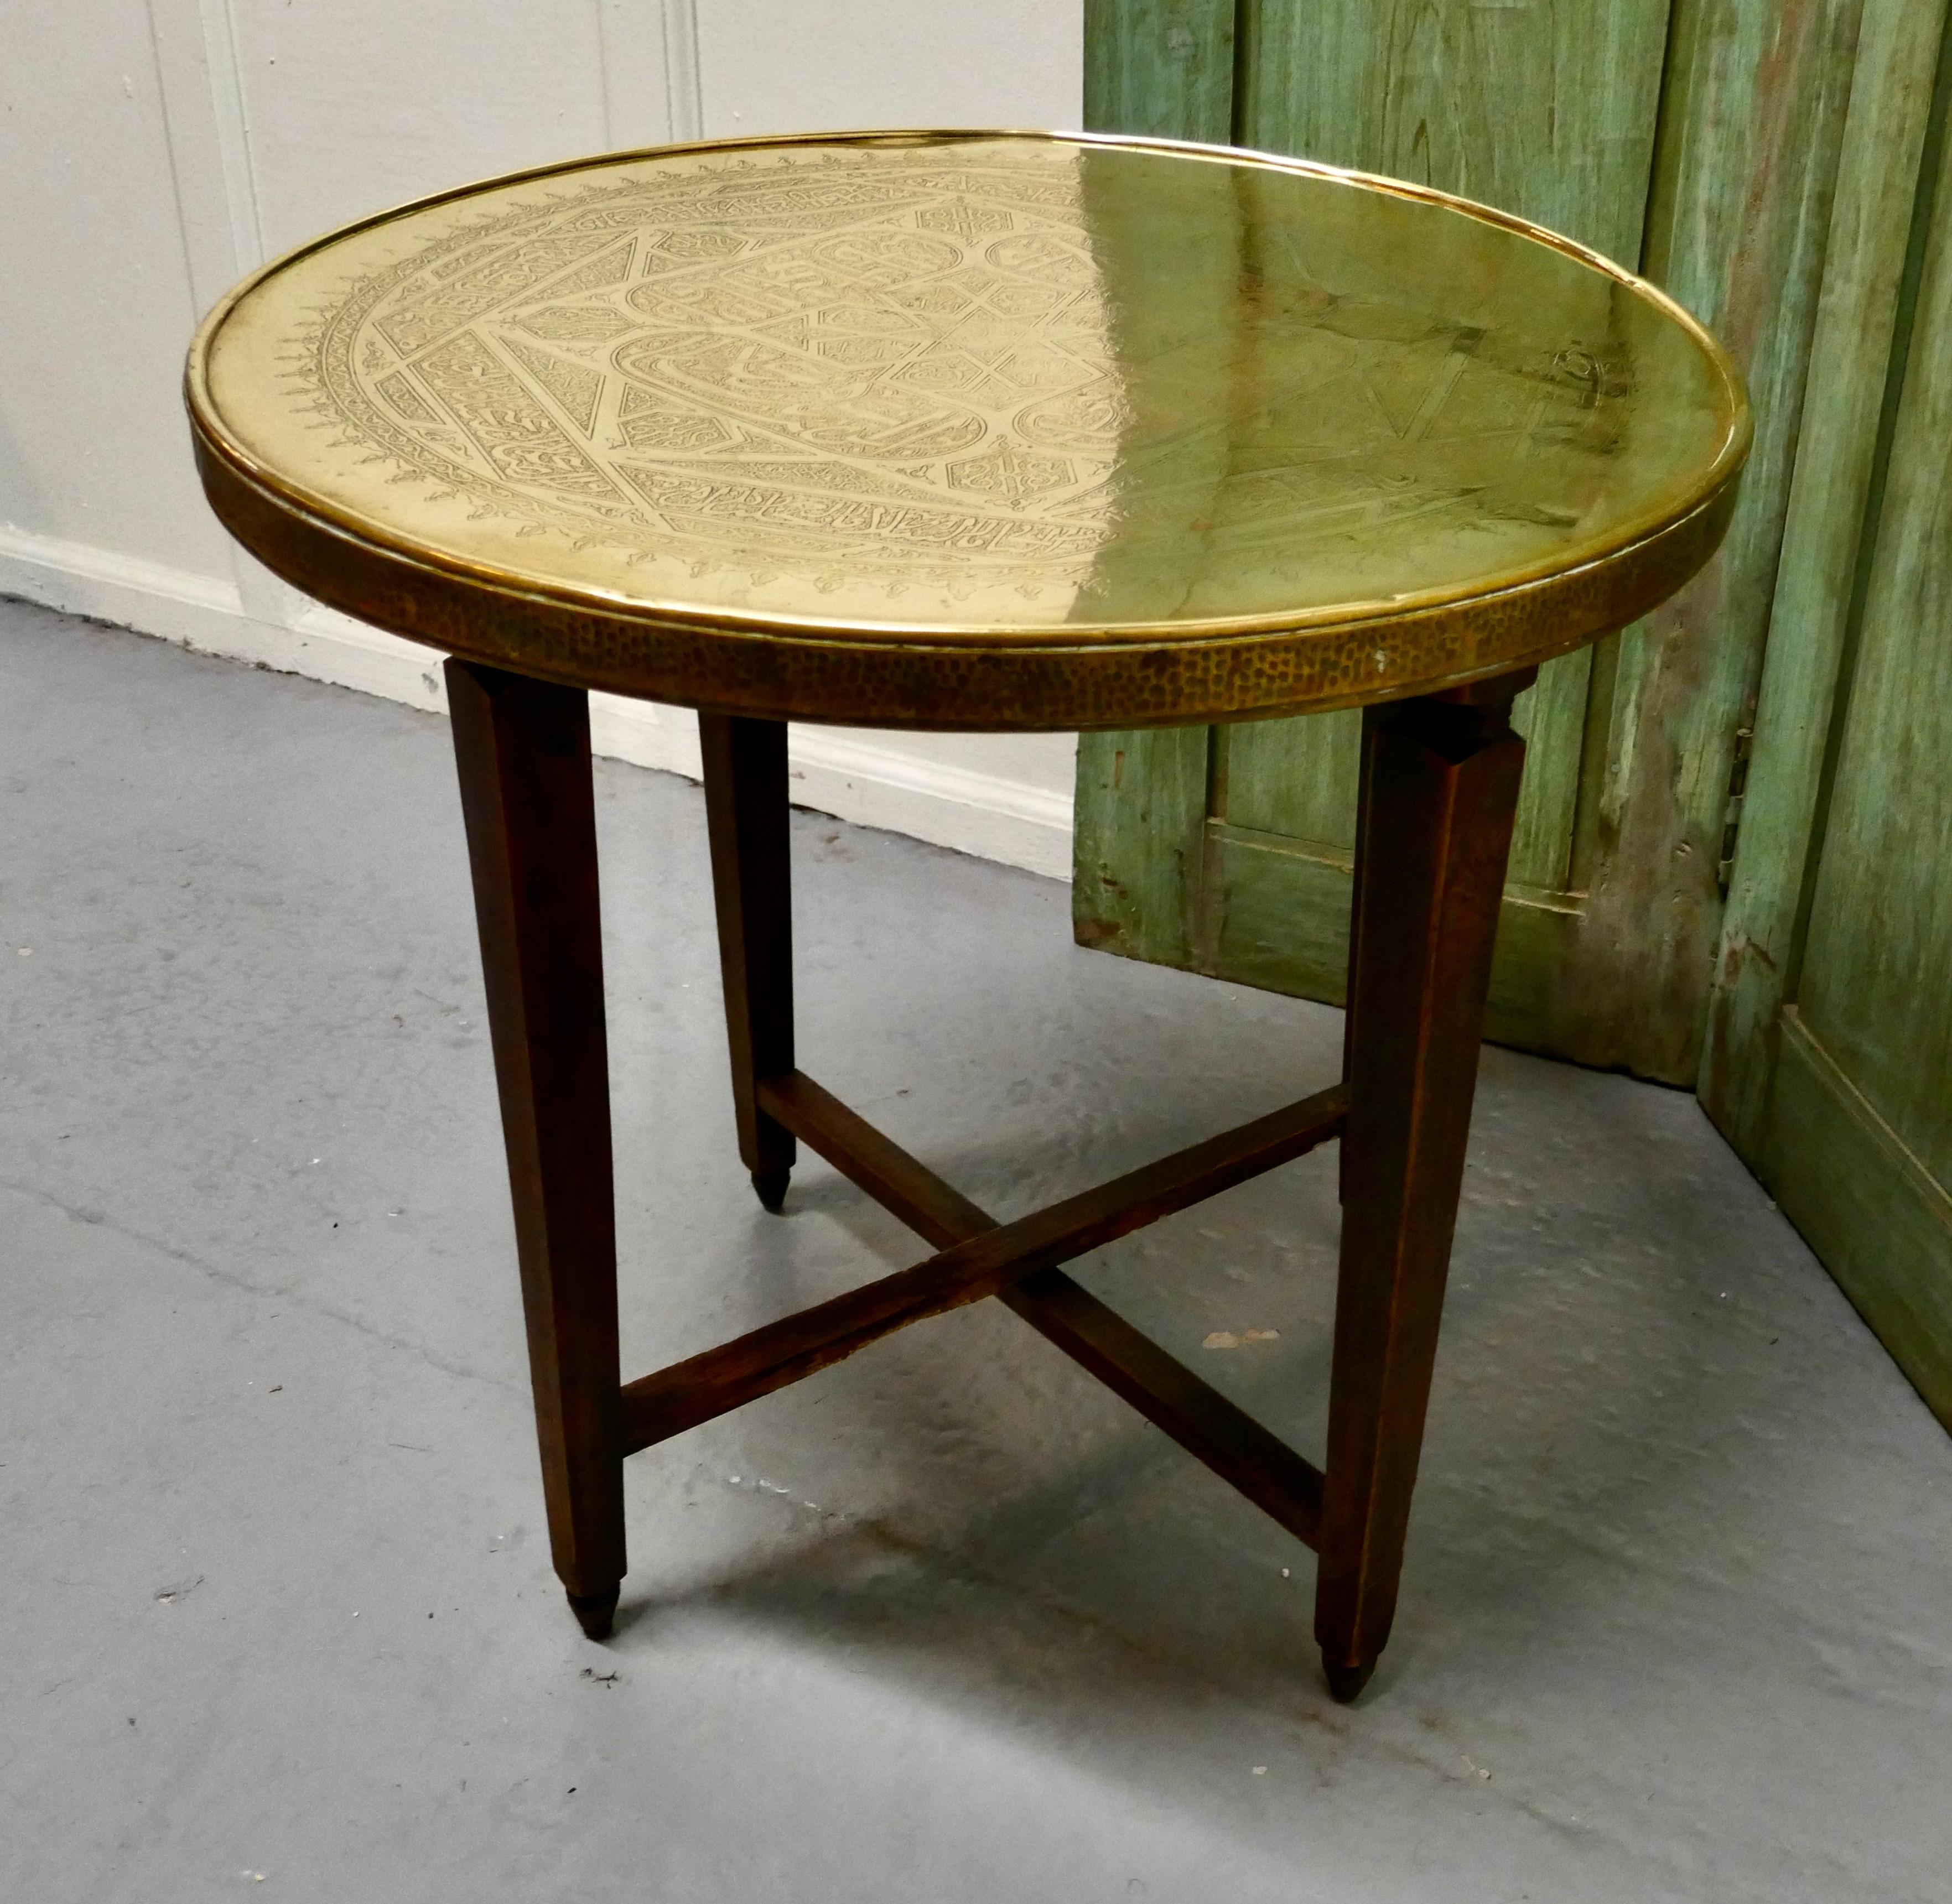 20th Century Brass Top Coffee Table or Occasional Table